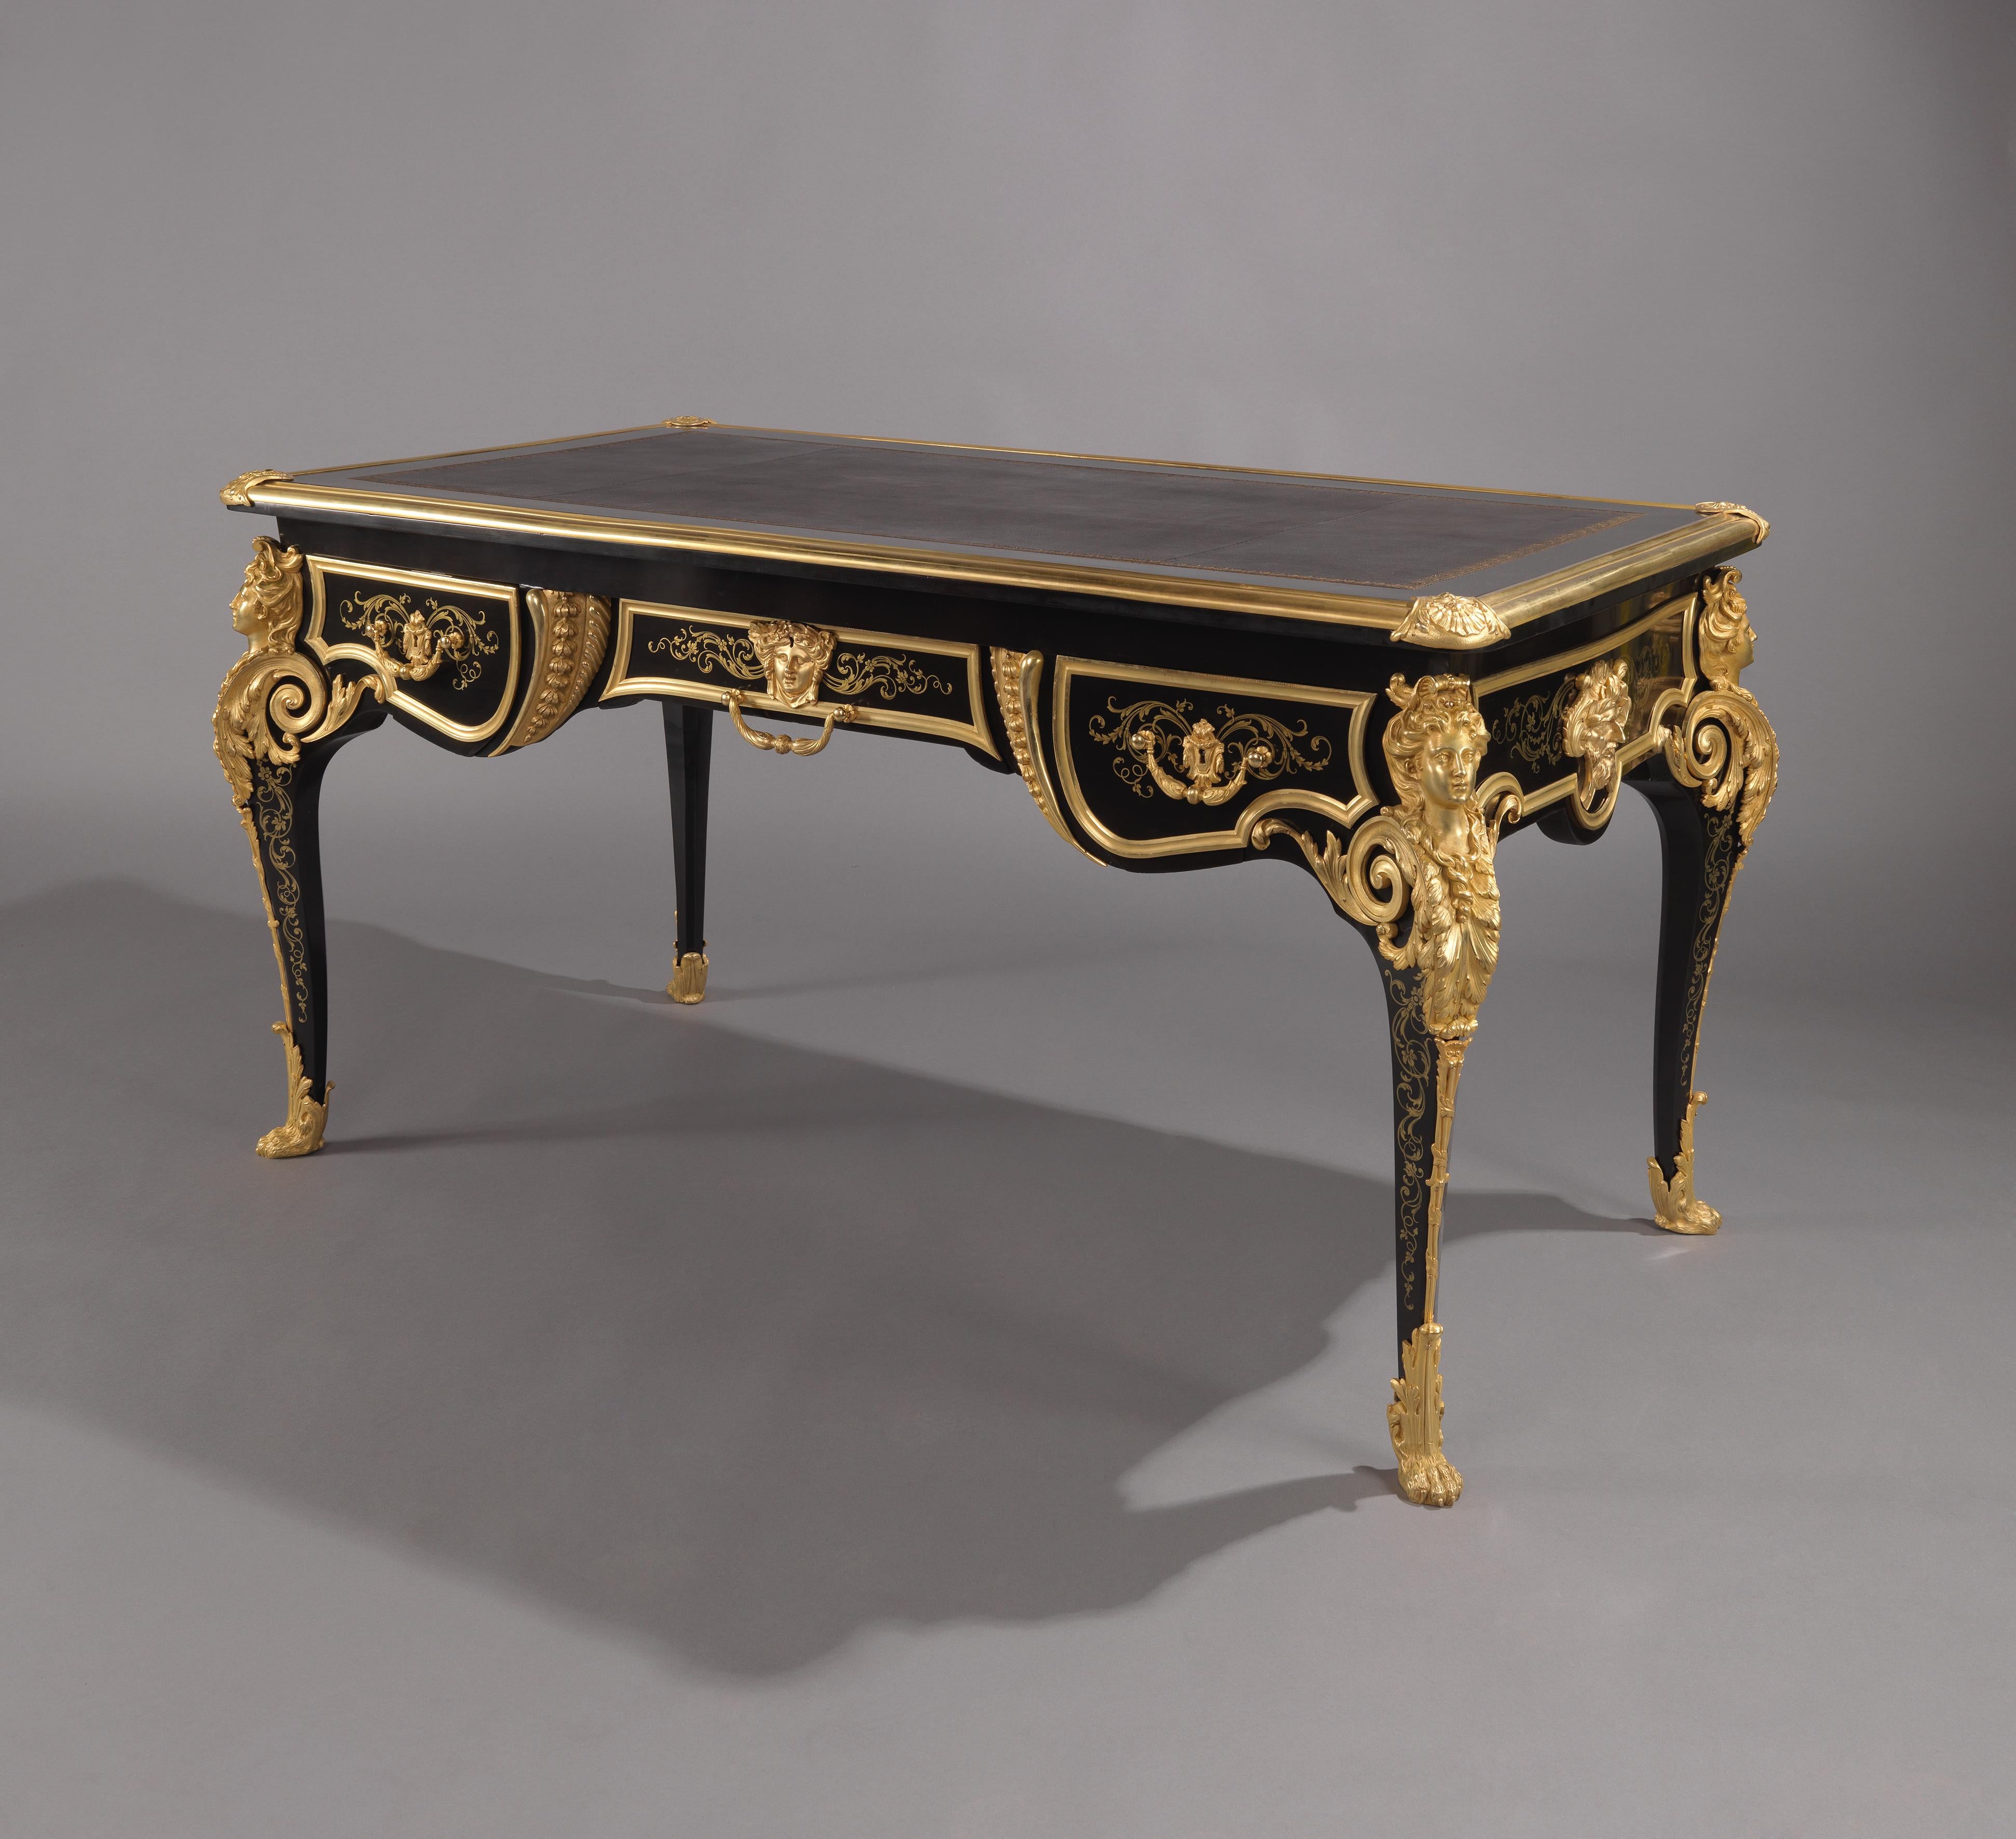 A fine Louis XV Style gilt-bronze and brass inlaid ebonized bureau plat, attributed to Befort Jeune.

French, circa 1870. 

The bronze mounts stamped to the reverse ‘BF’ and numbered ‘162’ or ‘92’.

This striking ebonised and gilt-bronze